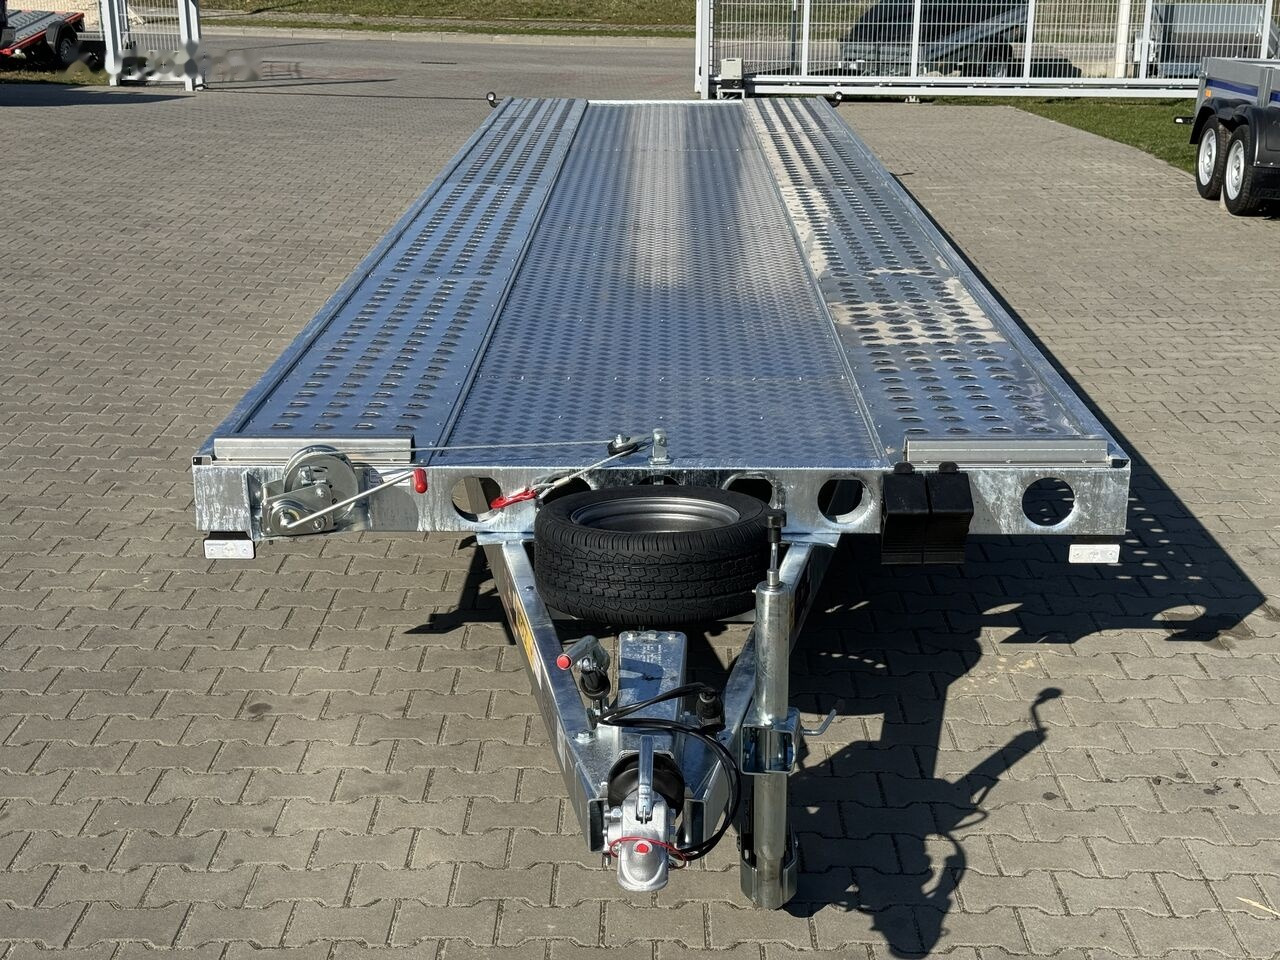 Remorque porte-voitures neuf Wiola L35G85 8.5m long trailer with 3 axles for transport of 2 cars: photos 5